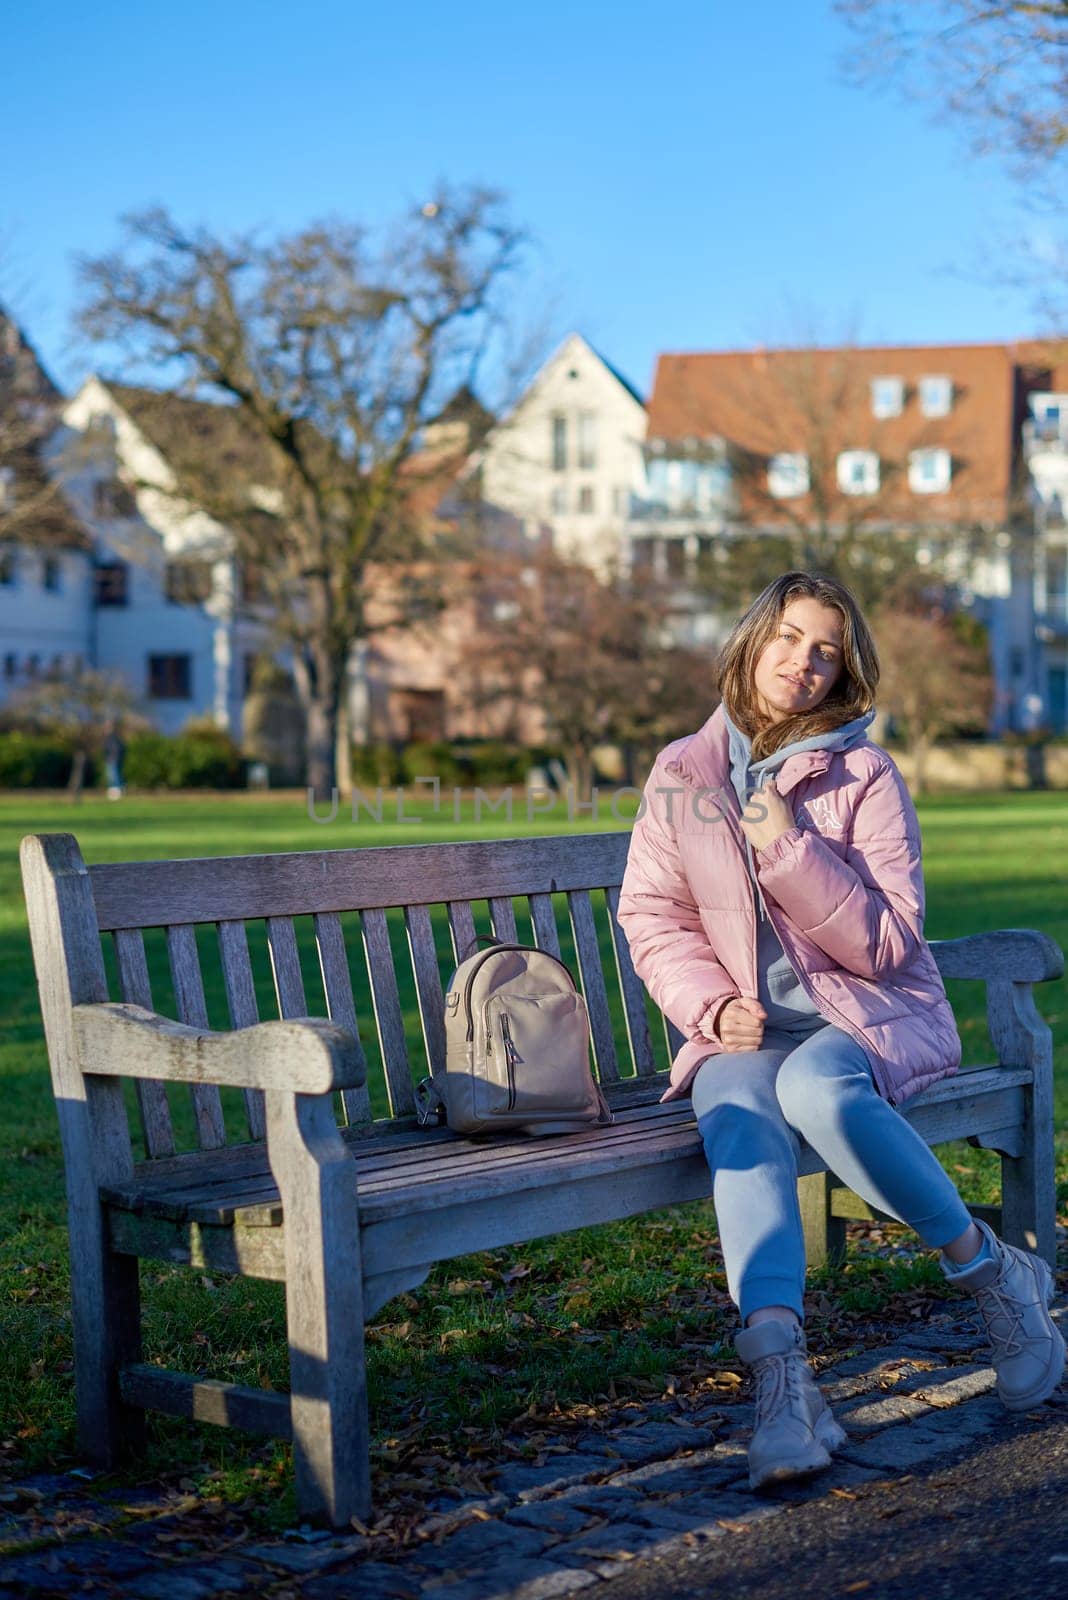 Beautiful Girl in Pink Jacket Relaxing on a Park Bench in the Background of an Old European Town. by Andrii_Ko